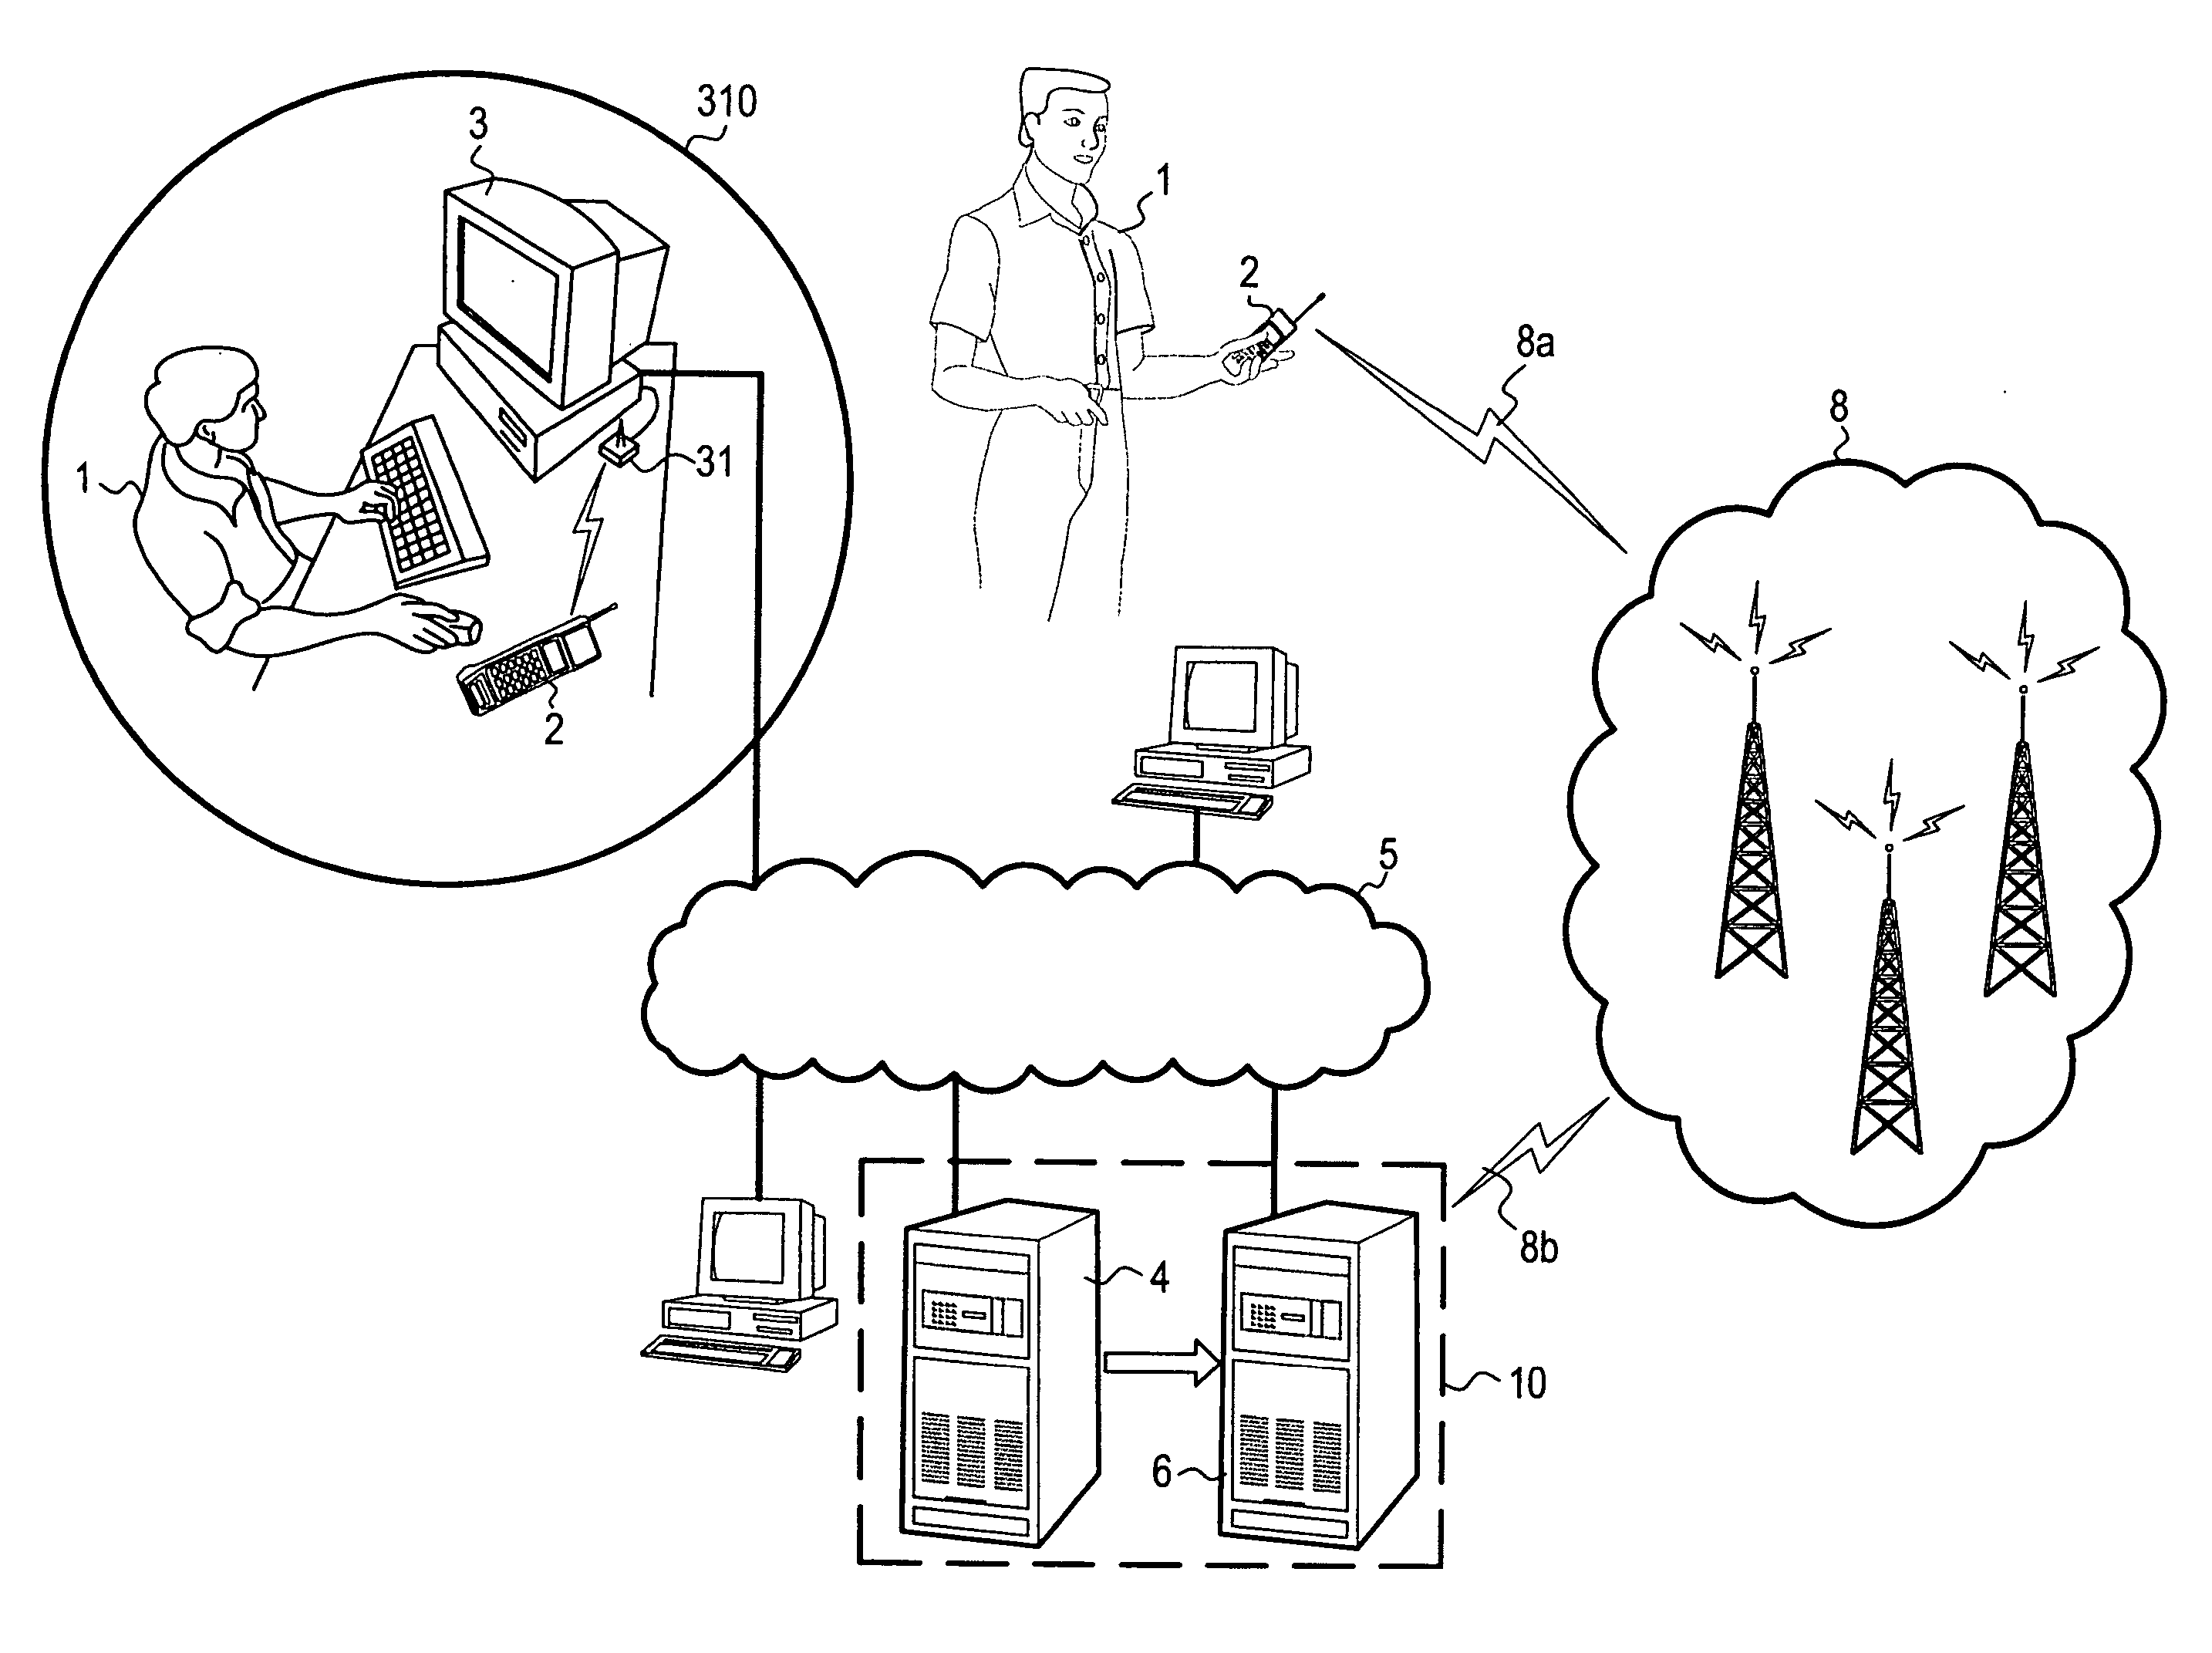 Method and a system for automatically activating and deactivating a service